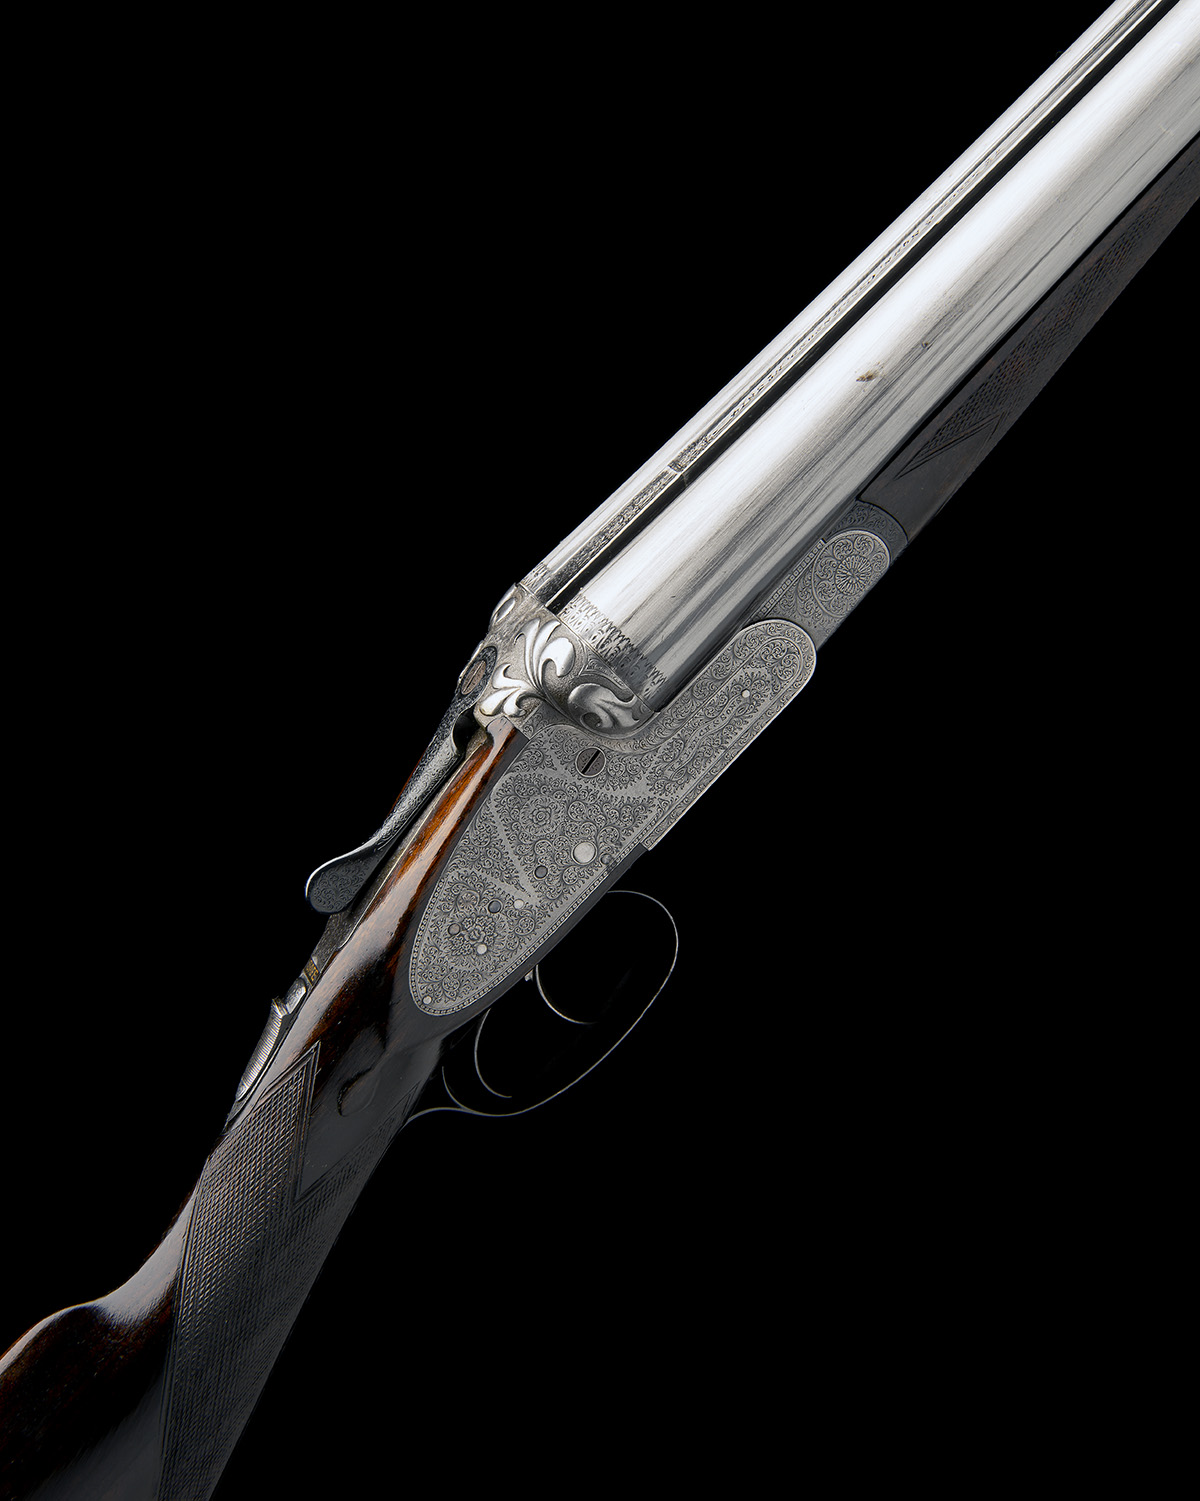 WM. LEECH & SONS A 12-BORE SIDELOCK EJECTOR, serial no. 3814, 26in. nitro reproved (in 2020,